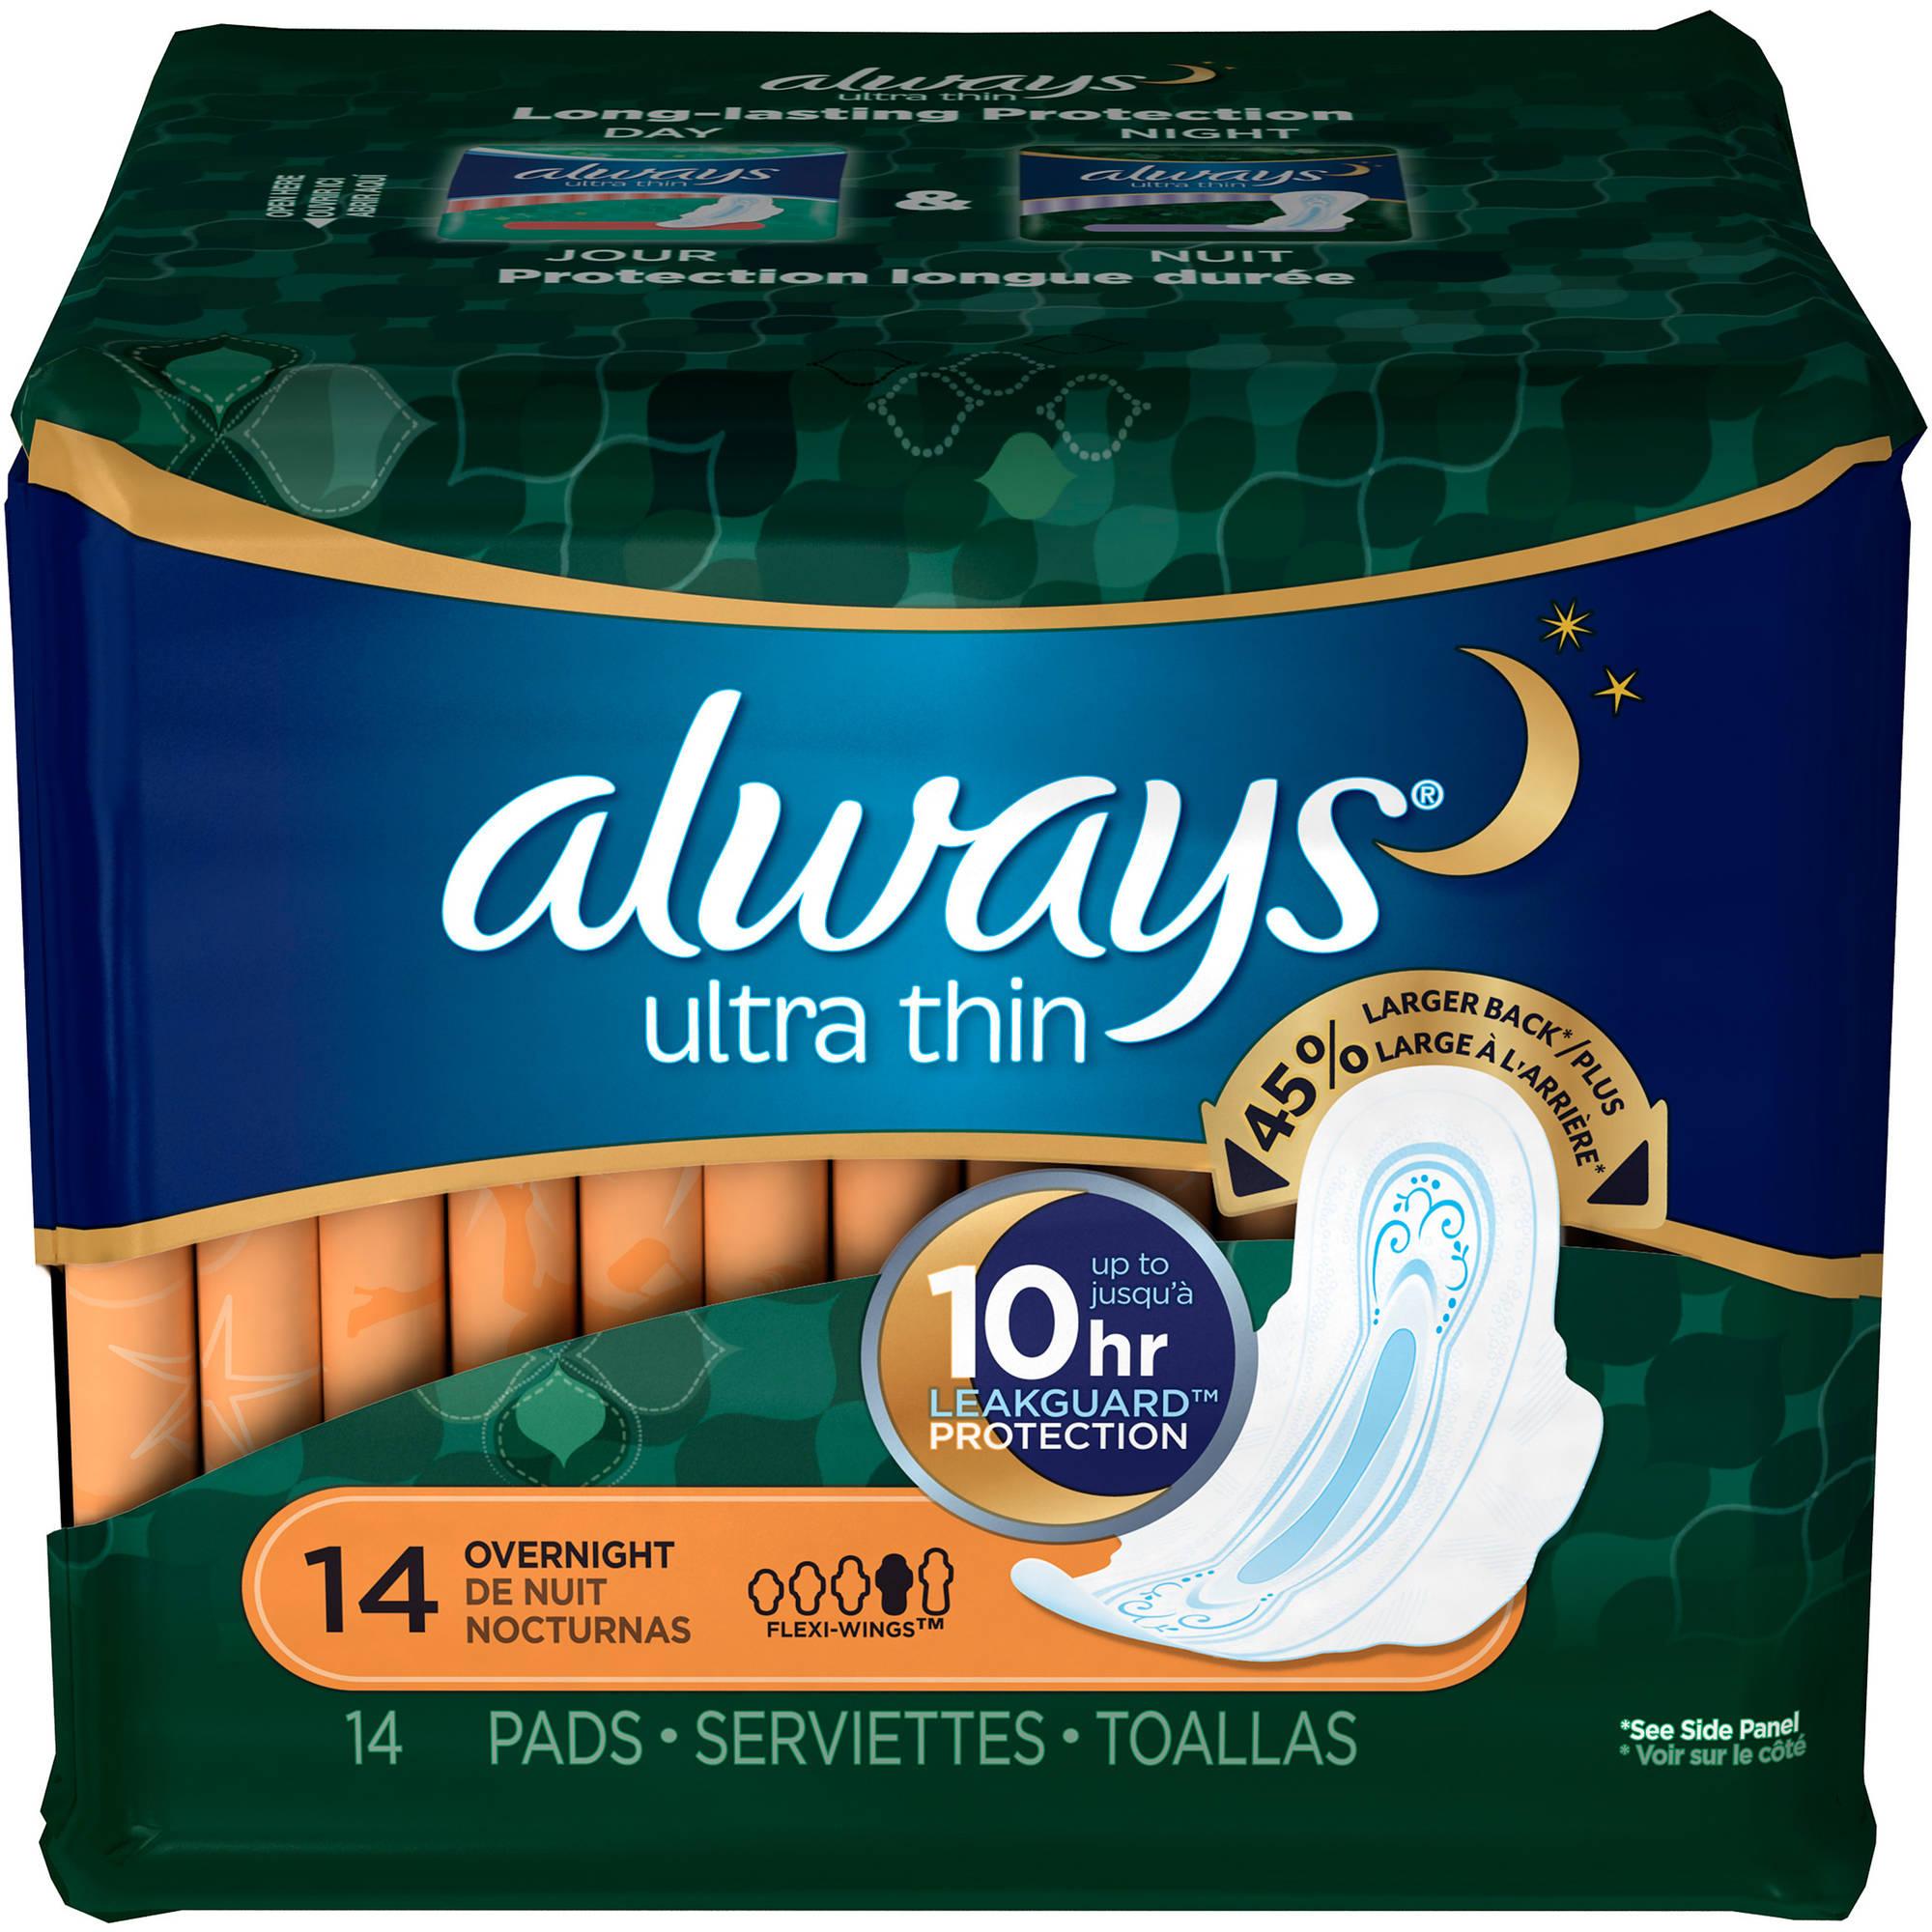 Always Ultra Thin 10 hr leakguard protection 14 count overnight 1.jpg  by BudgetGeneral